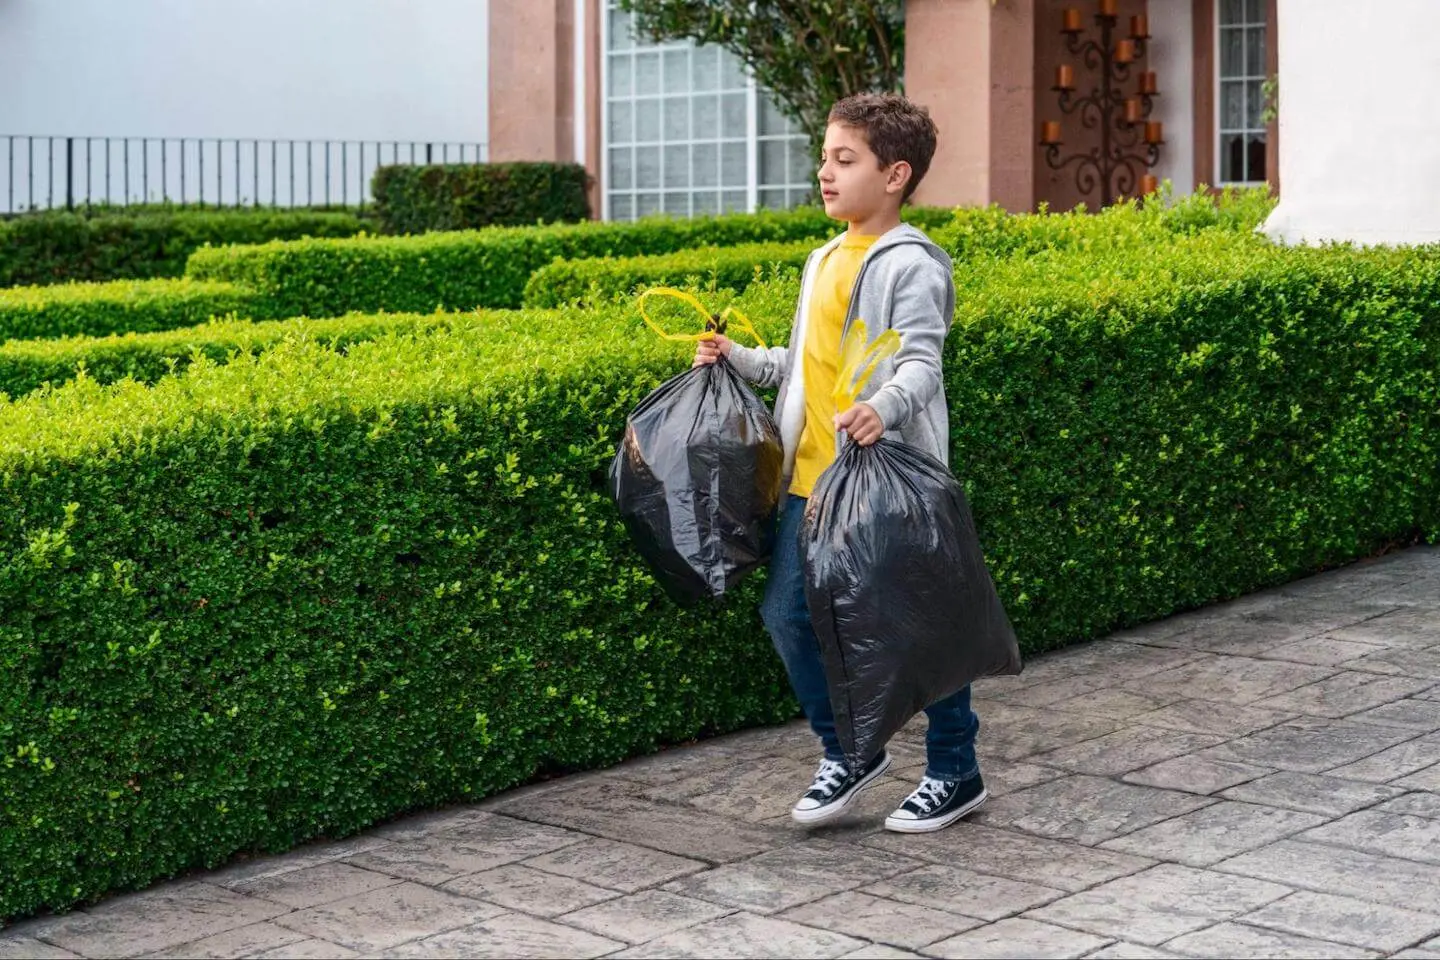 Jobs for 11 year olds: boy carrying 2 trash bags